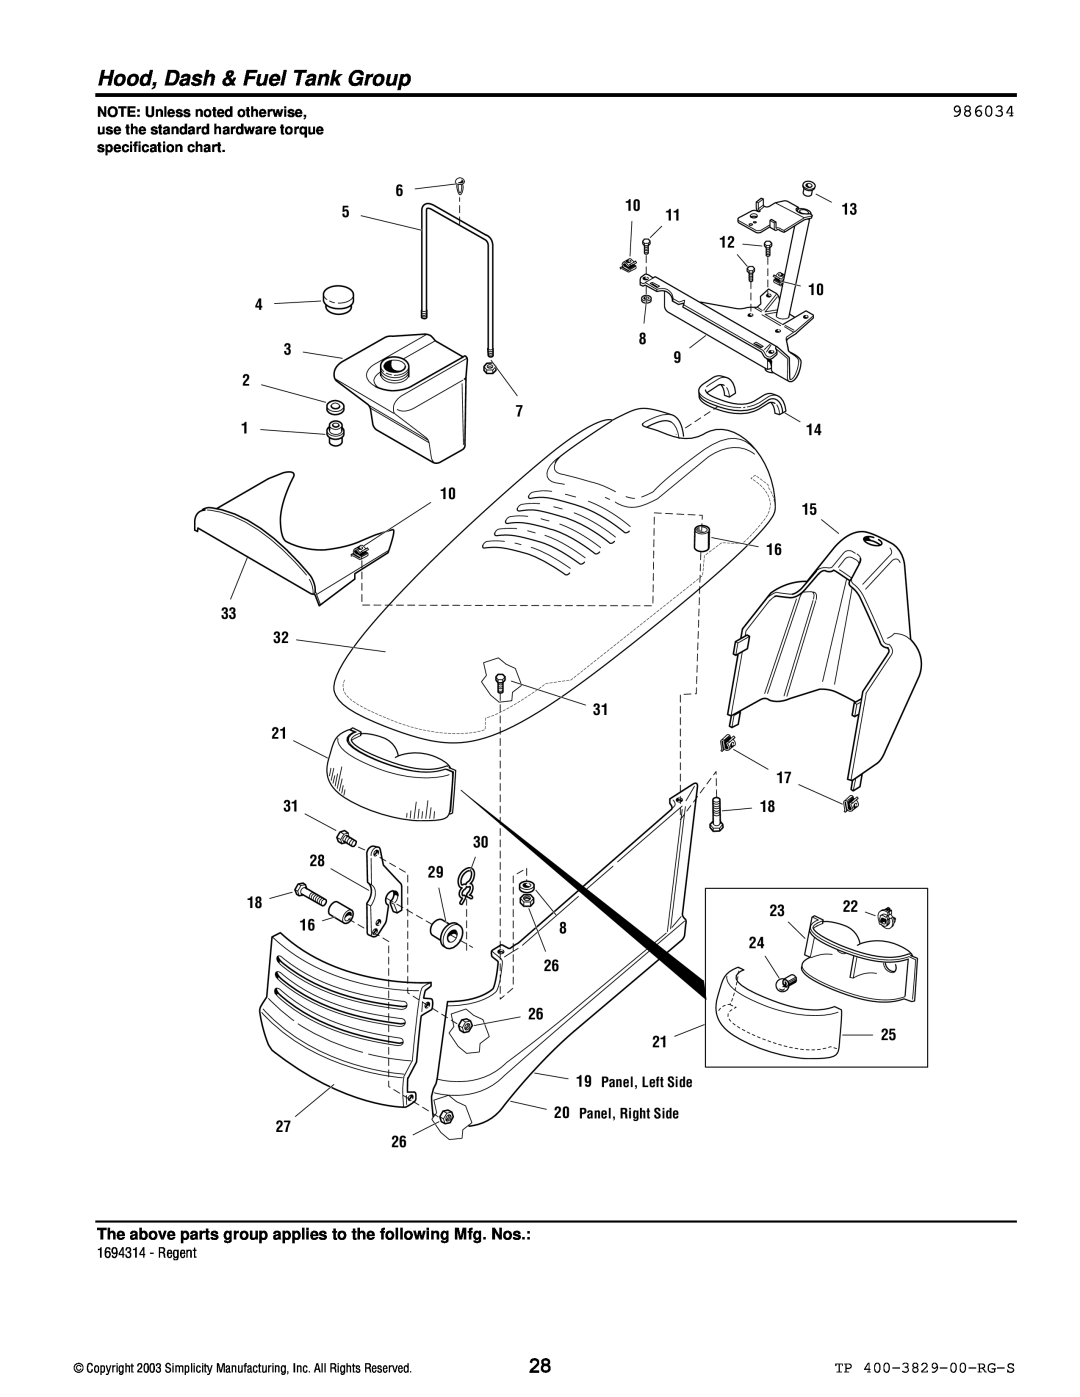 Simplicity 1694310, 1693930, 1693920 Hood, Dash & Fuel Tank Group, 986034, TP 400-3829-00-RG-S, NOTE Unless noted otherwise 